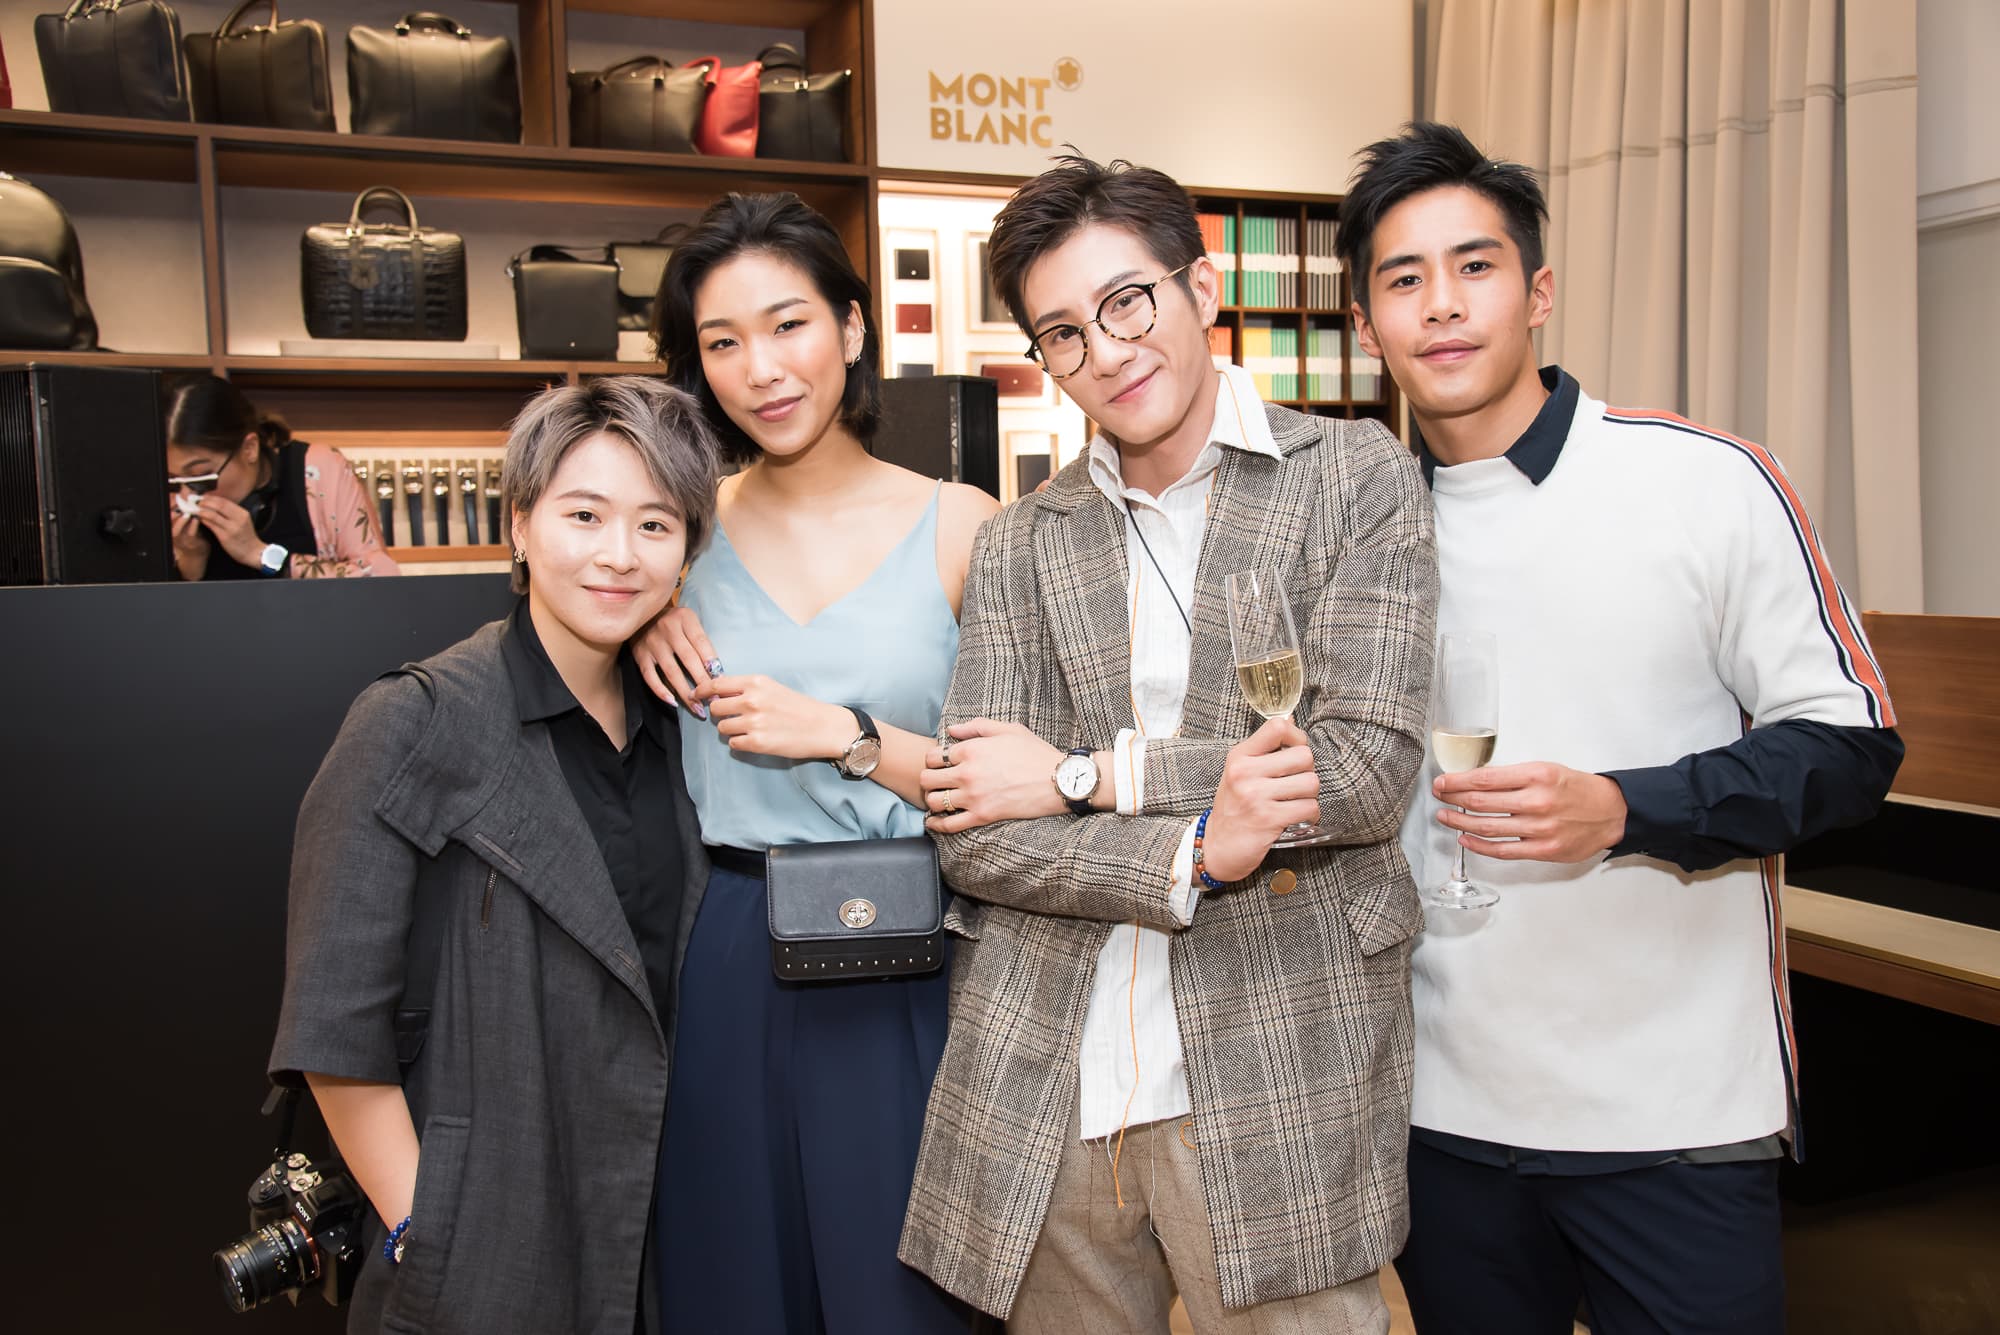 Gallery: Montblanc's 1881 flagship store reopening party